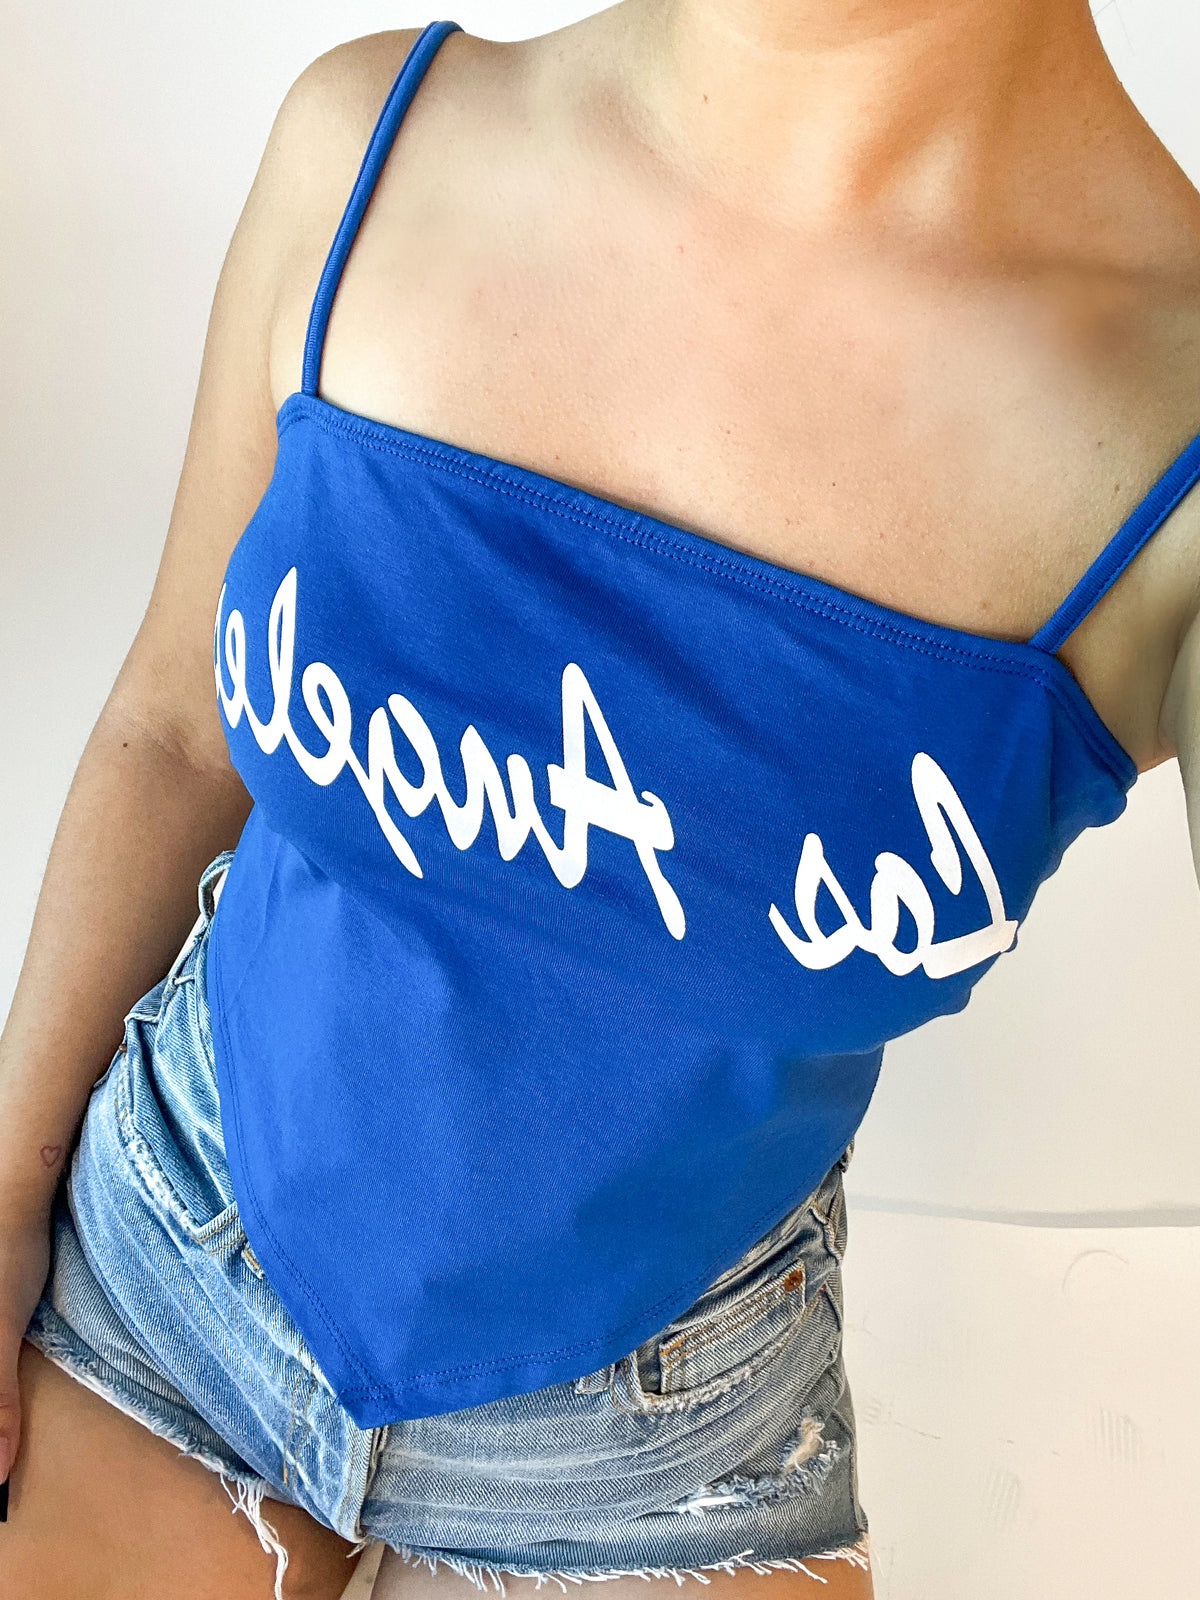 royal blue los angeles top, white font, spaghetti strap, adjustable straps, self tie back, triangle cut out